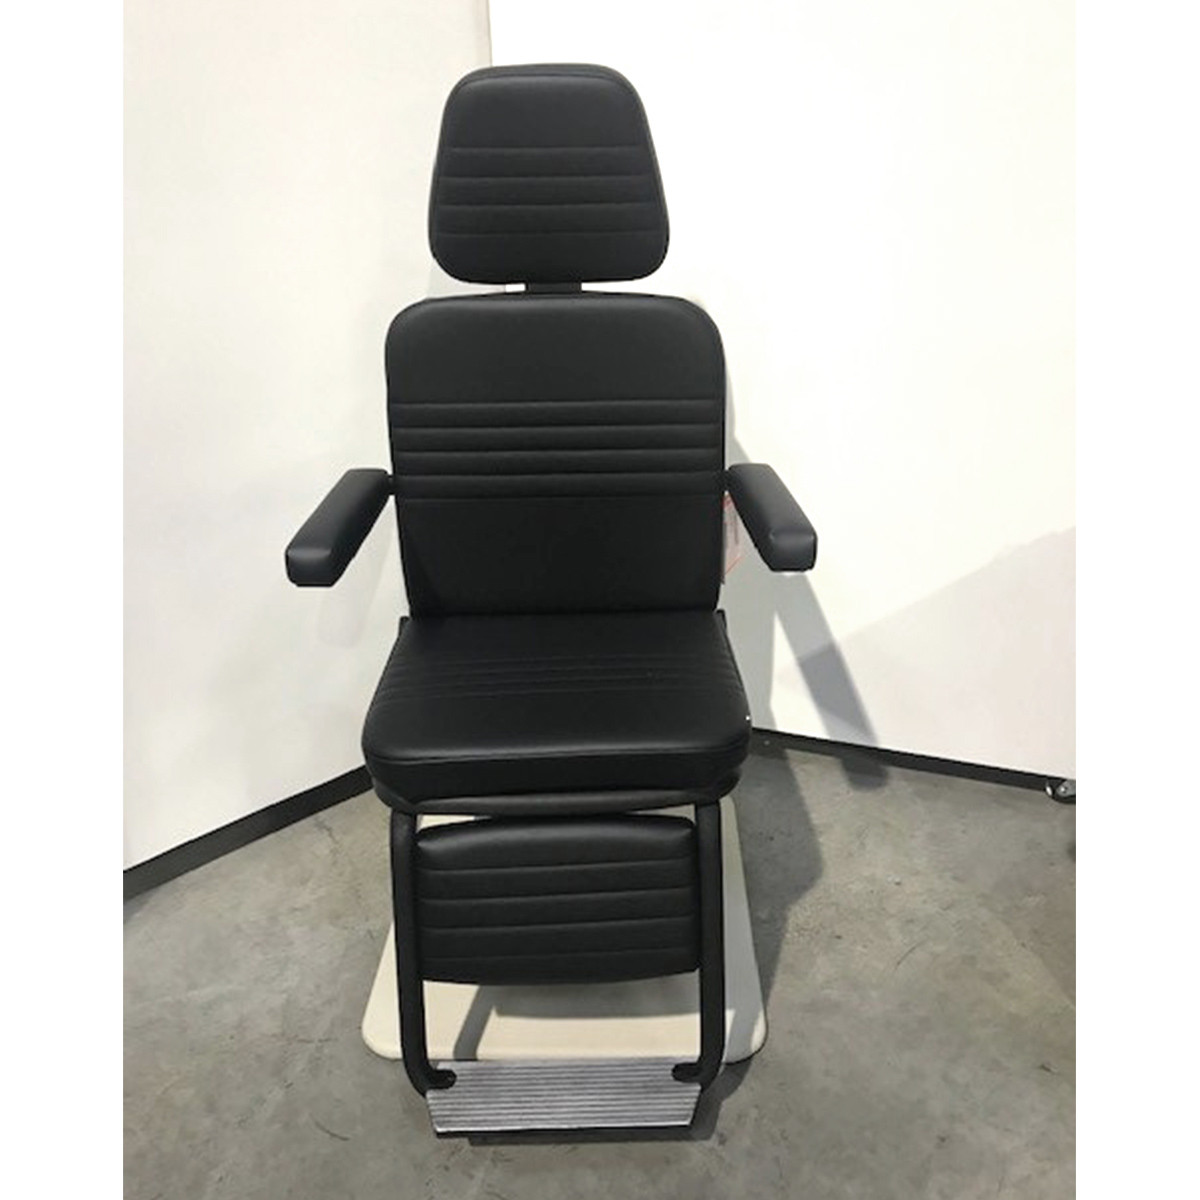 Reliance 5200 L15 Chair (Pre-Owned)